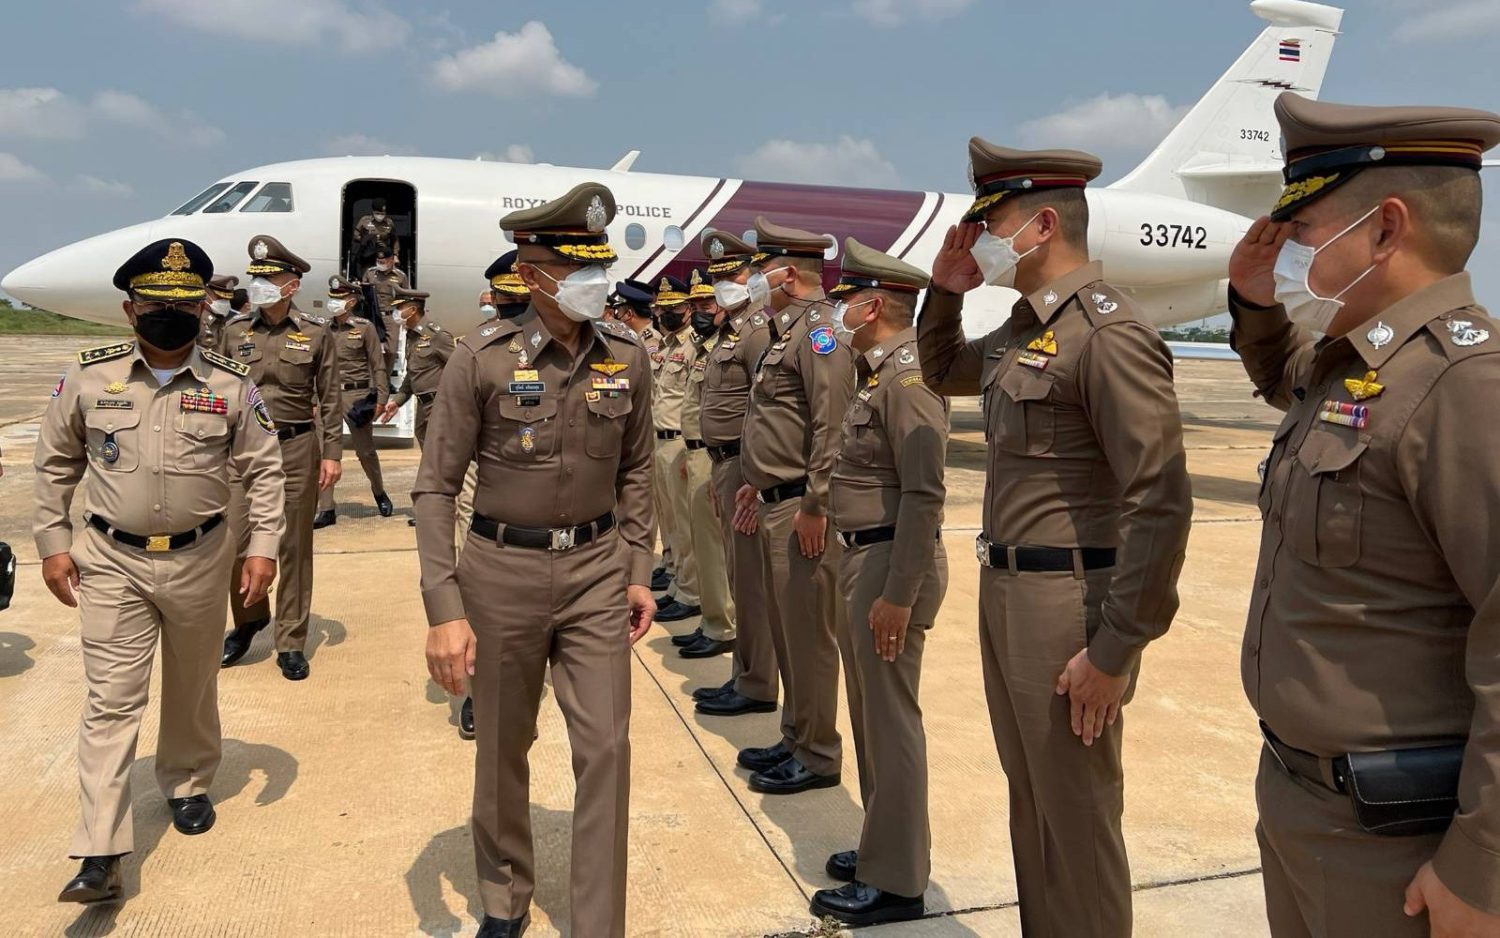 Thai police officials during a visit to Cambodia in April 2022. (Thai police)